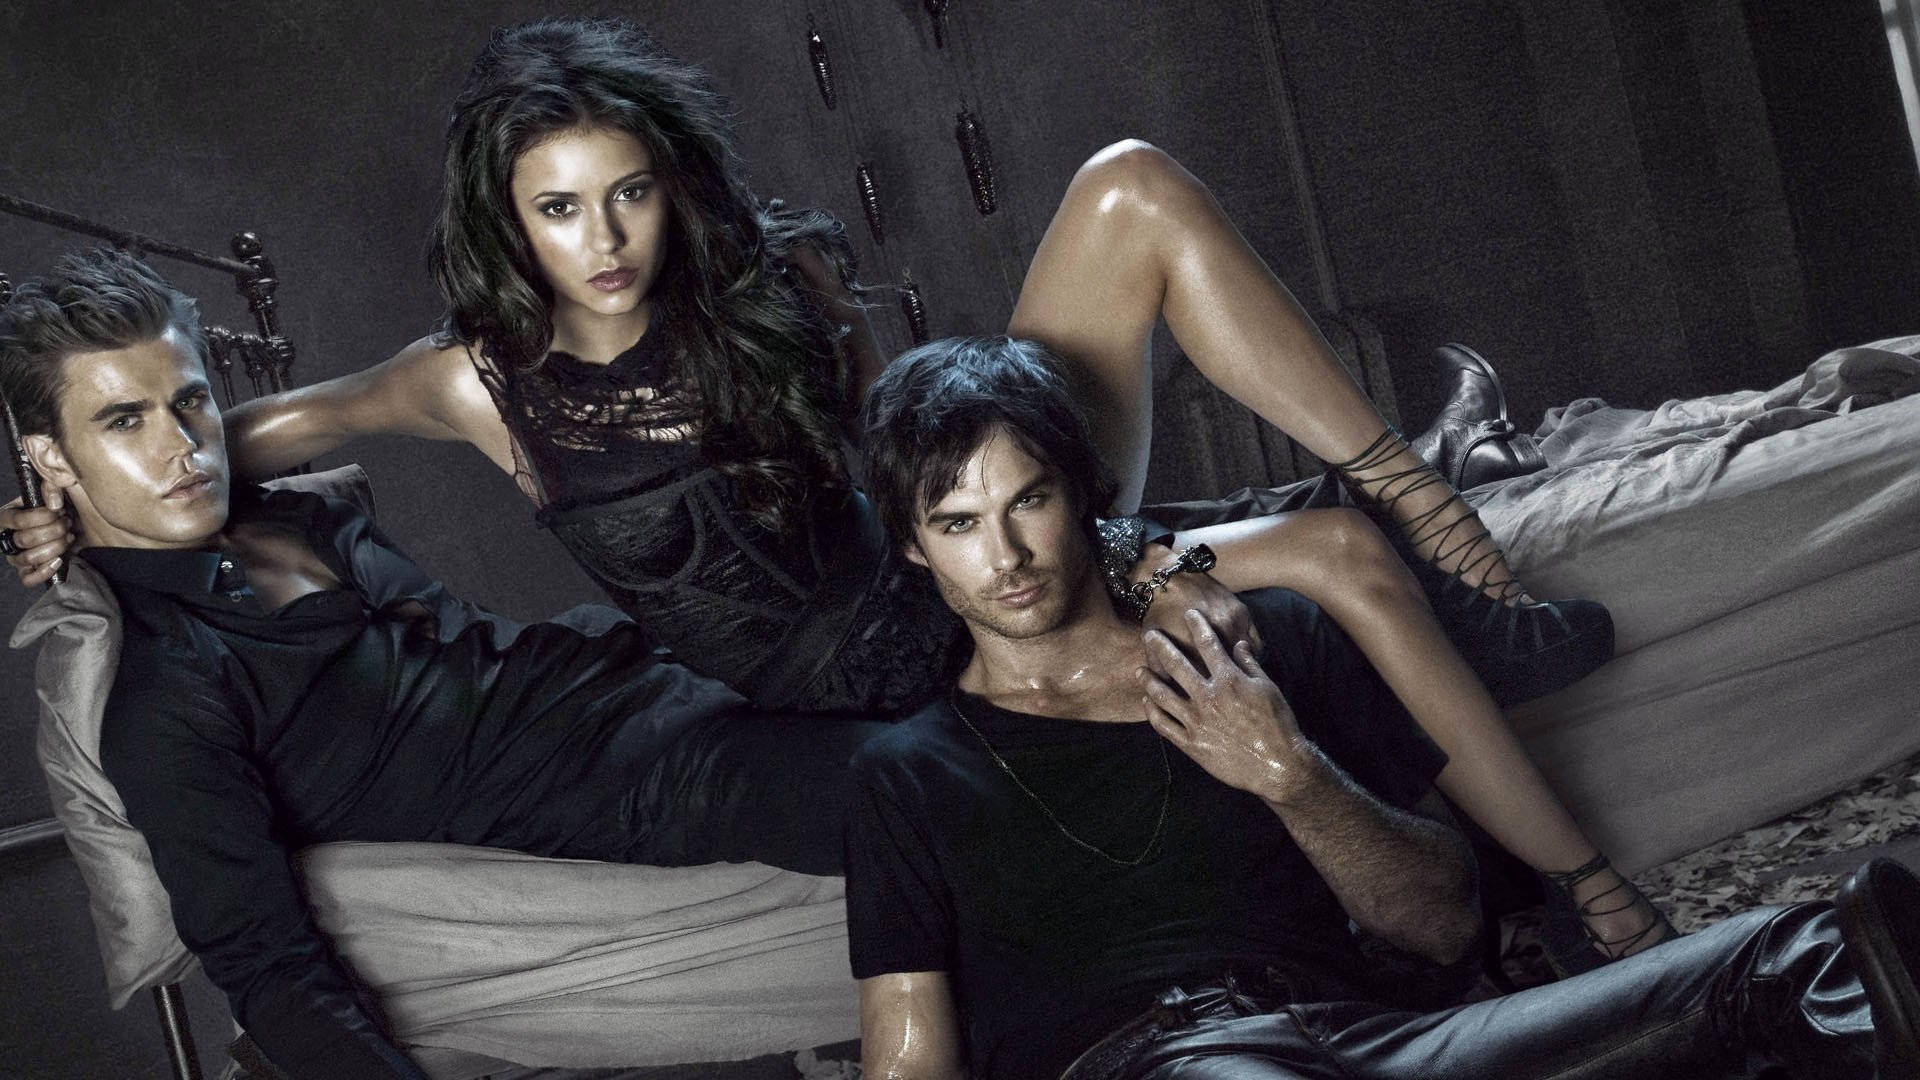 The Vampire Diaries Characters On Bed Background